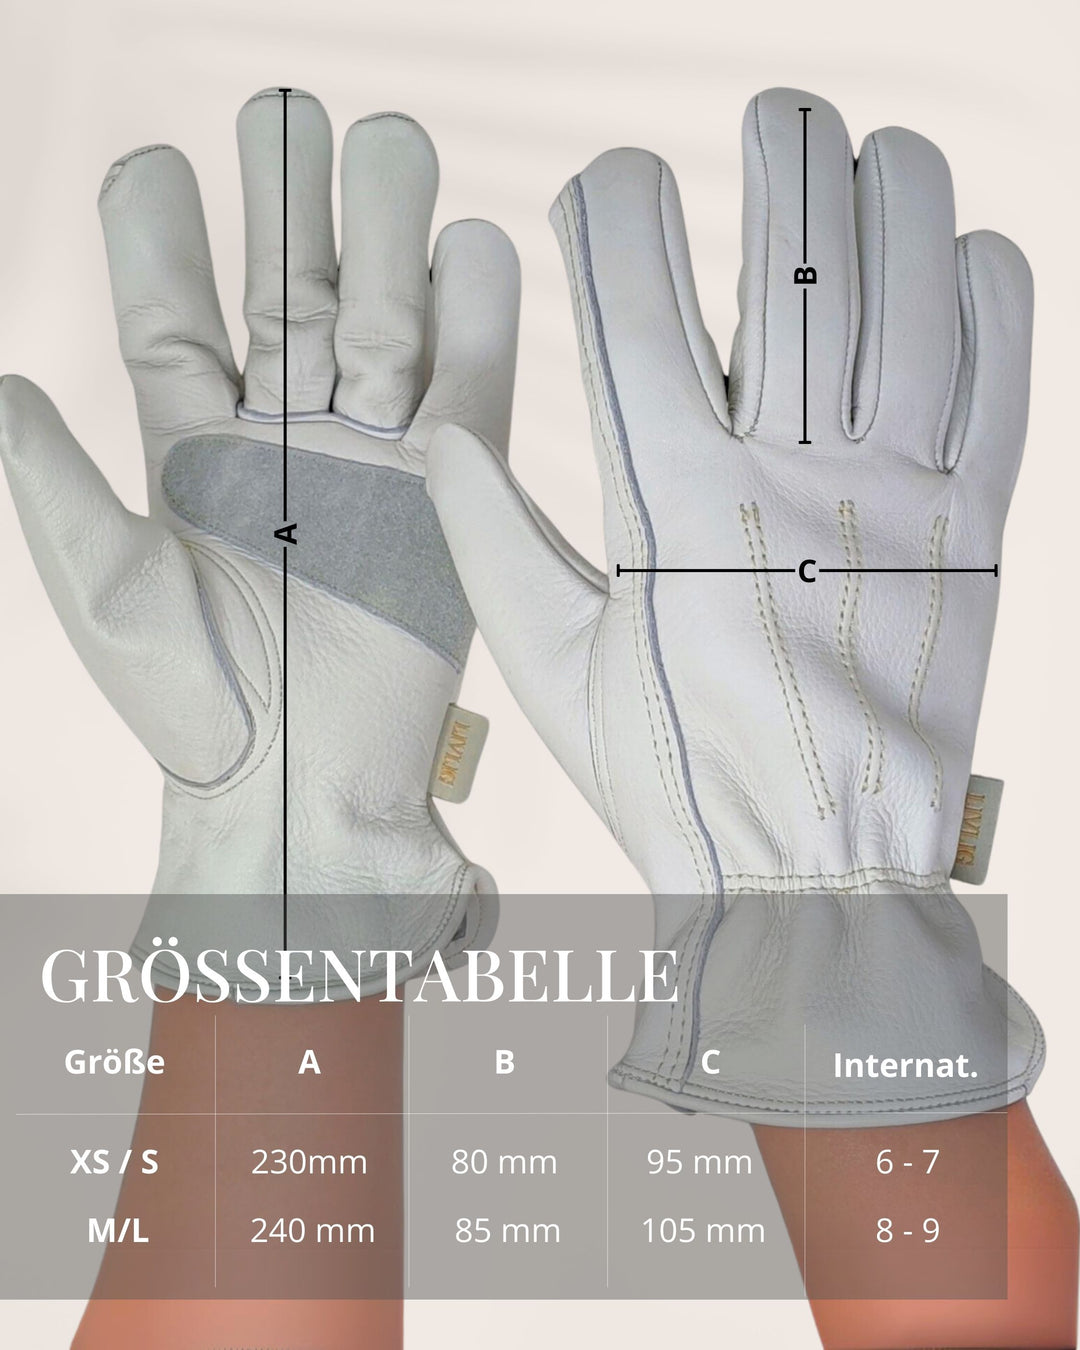 Gardening gloves made of cowhide